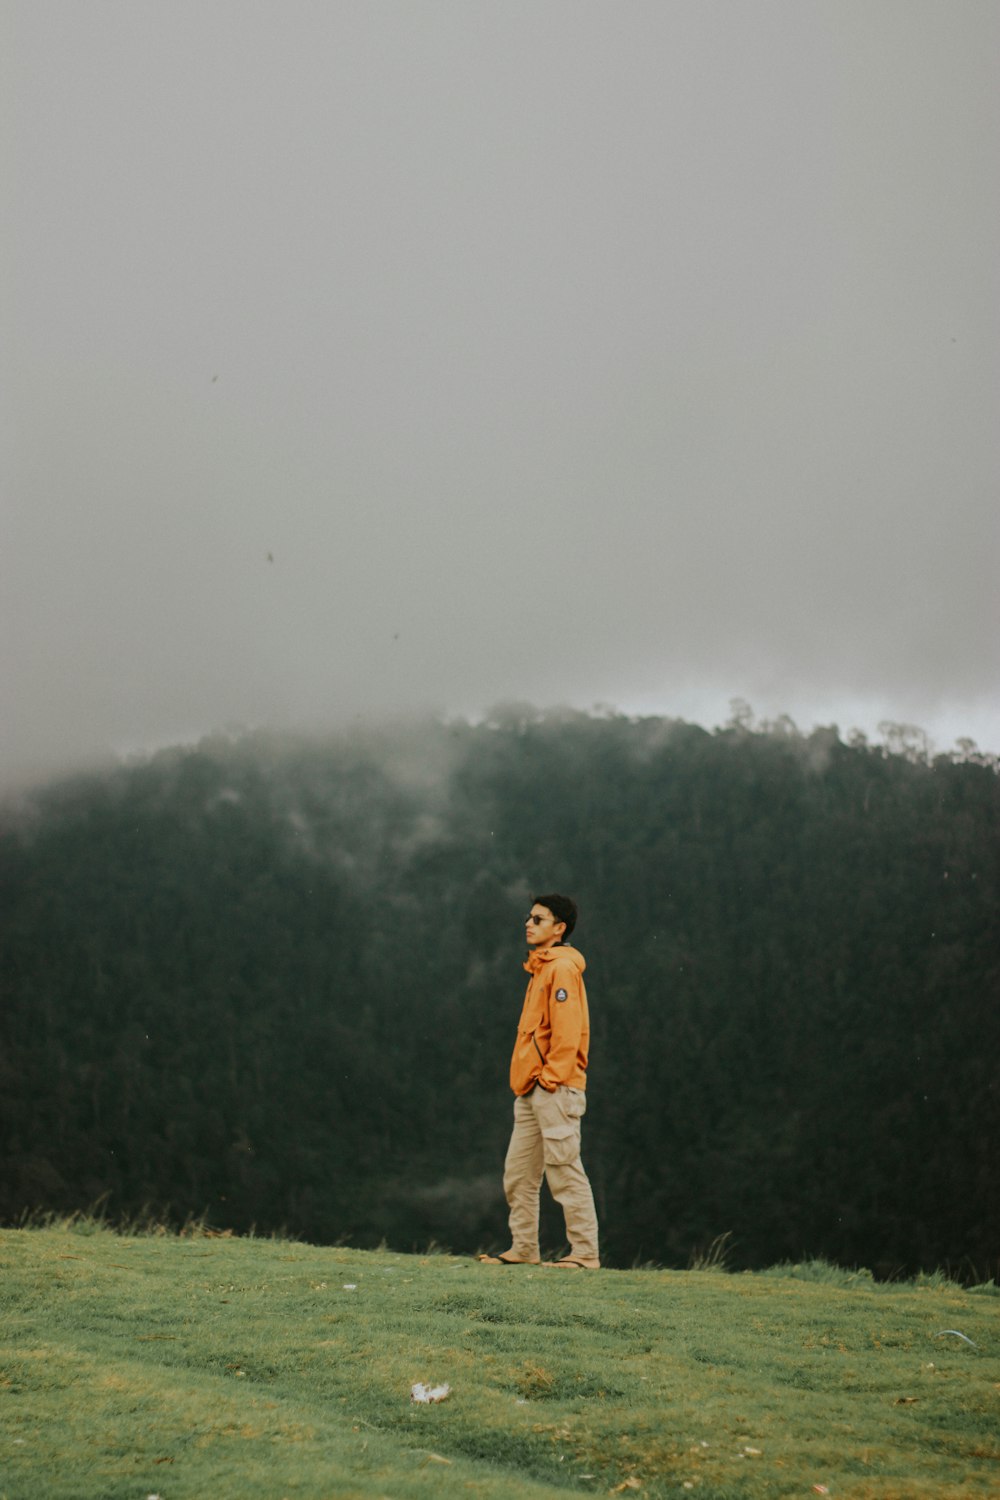 man in brown jacket standing on green grass field during foggy weather